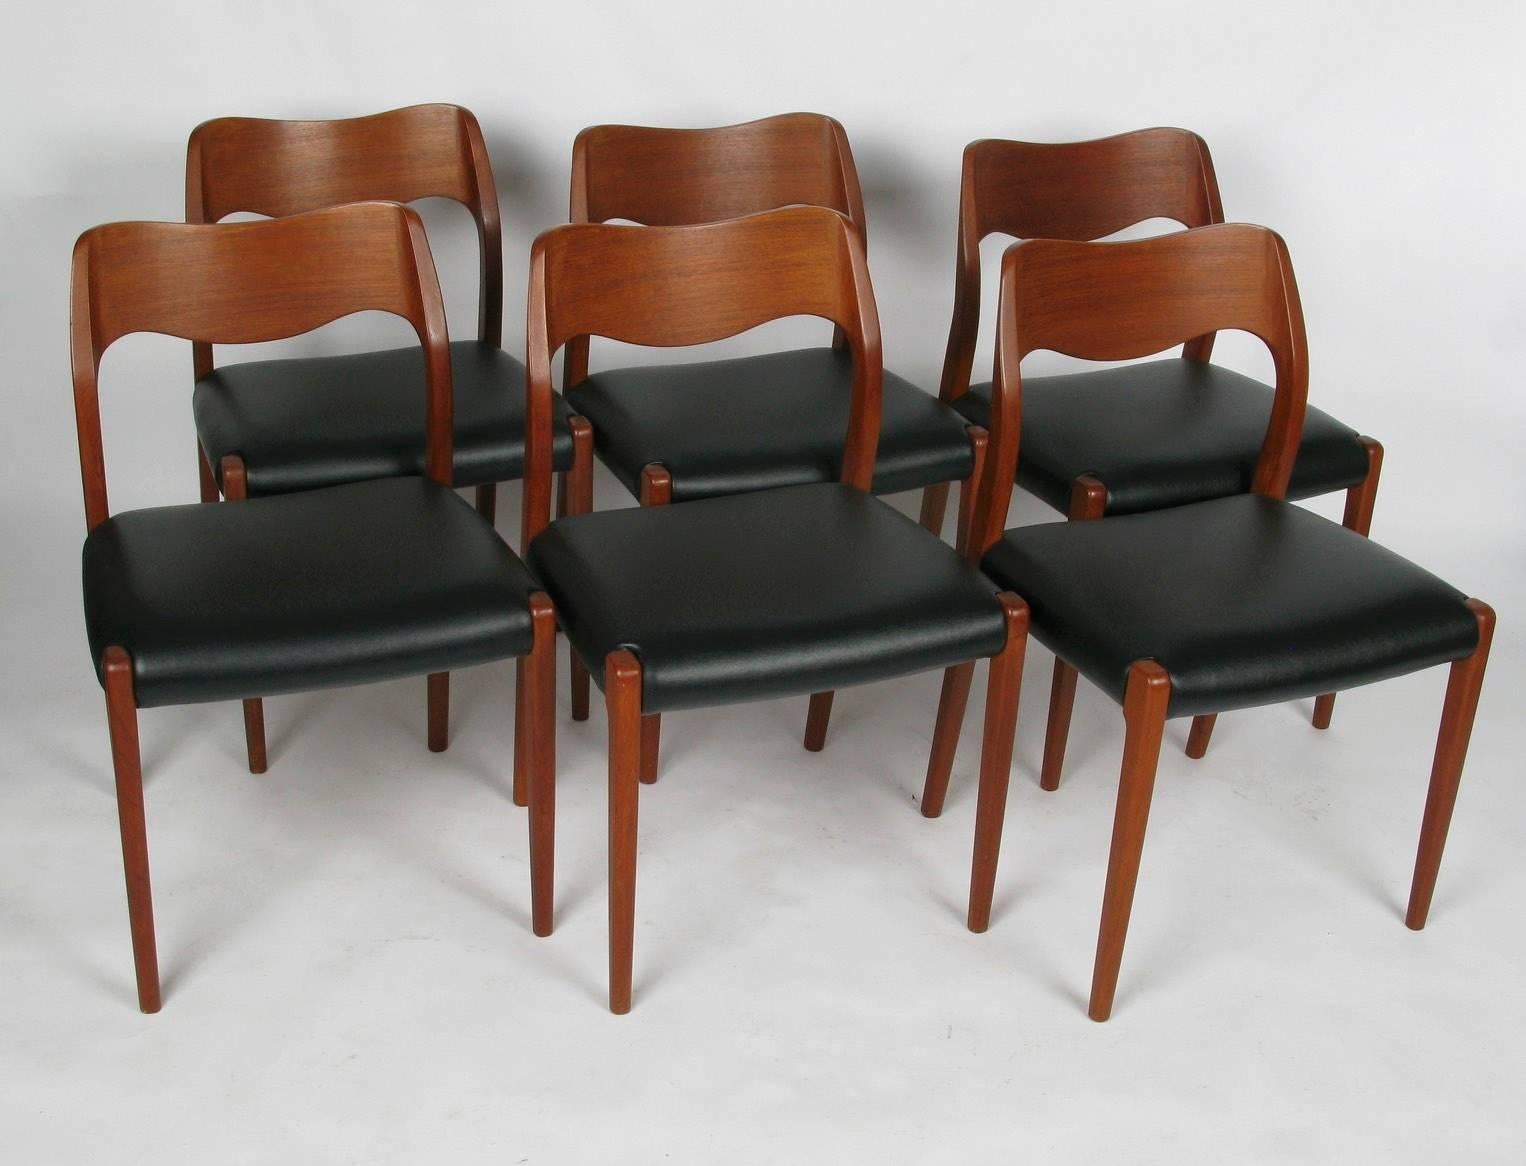 Set of eight 1960s teak dining chairs (2 #55 armchairs & 6 #71 side chairs) from Denmark by Niels Moller for J. L. Moller. New seat upholstery.
Side chairs measure: 19.5